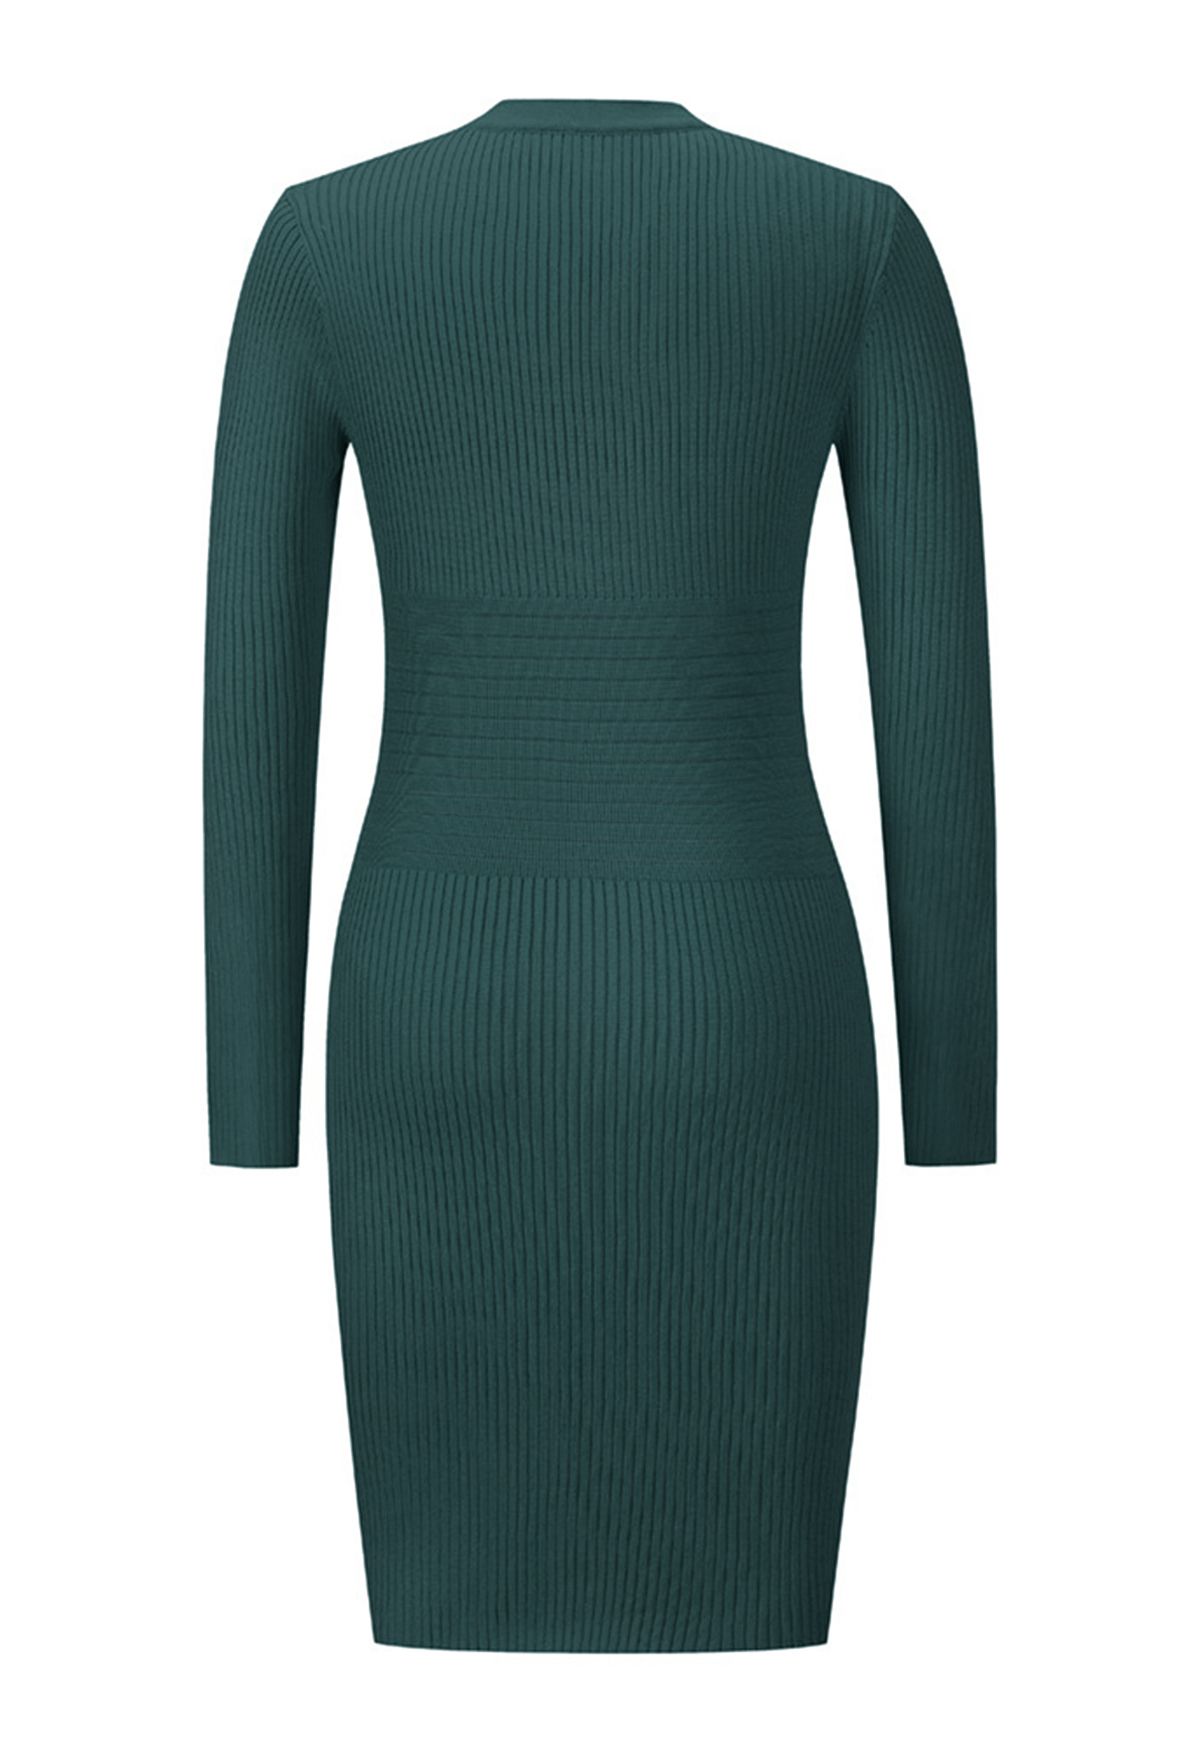 Decorous Gold Button Fitted Knit Dress in Emerald